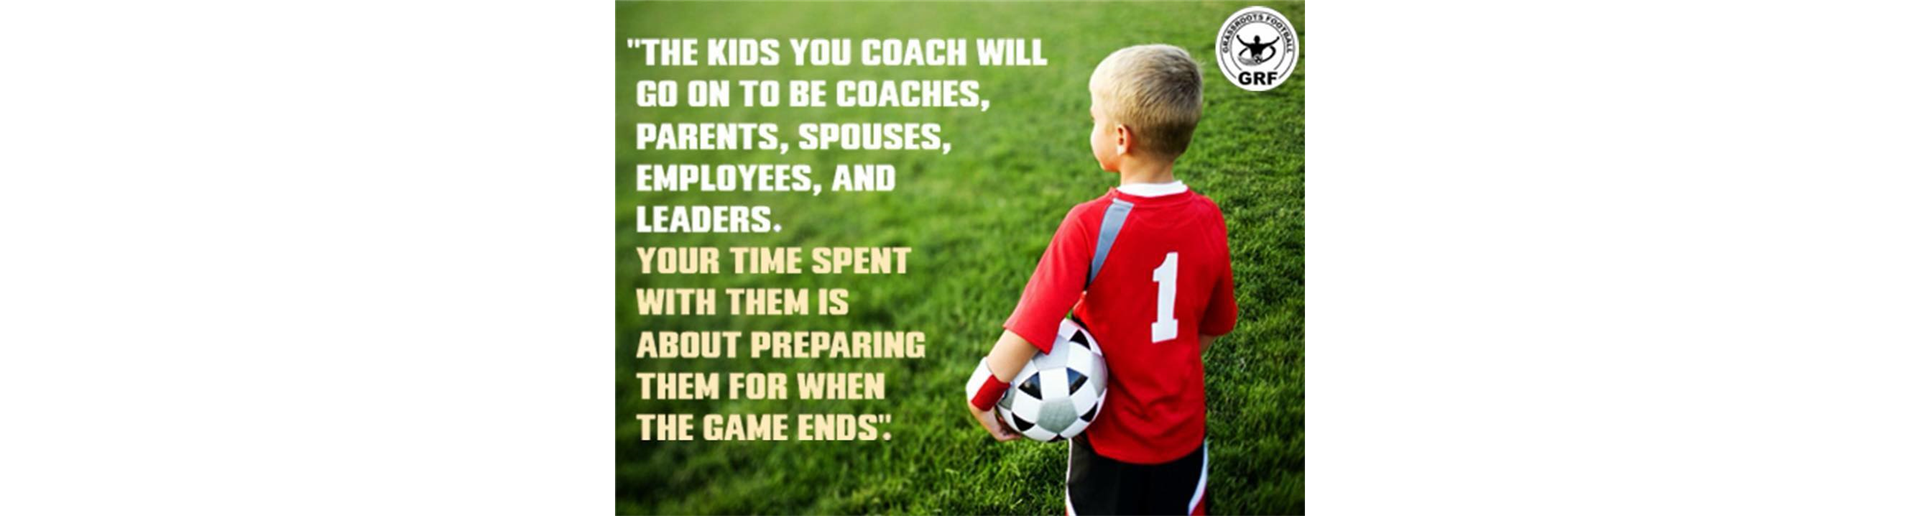 Ever thought about coaching? Help us grow our future! Great coaching resources available